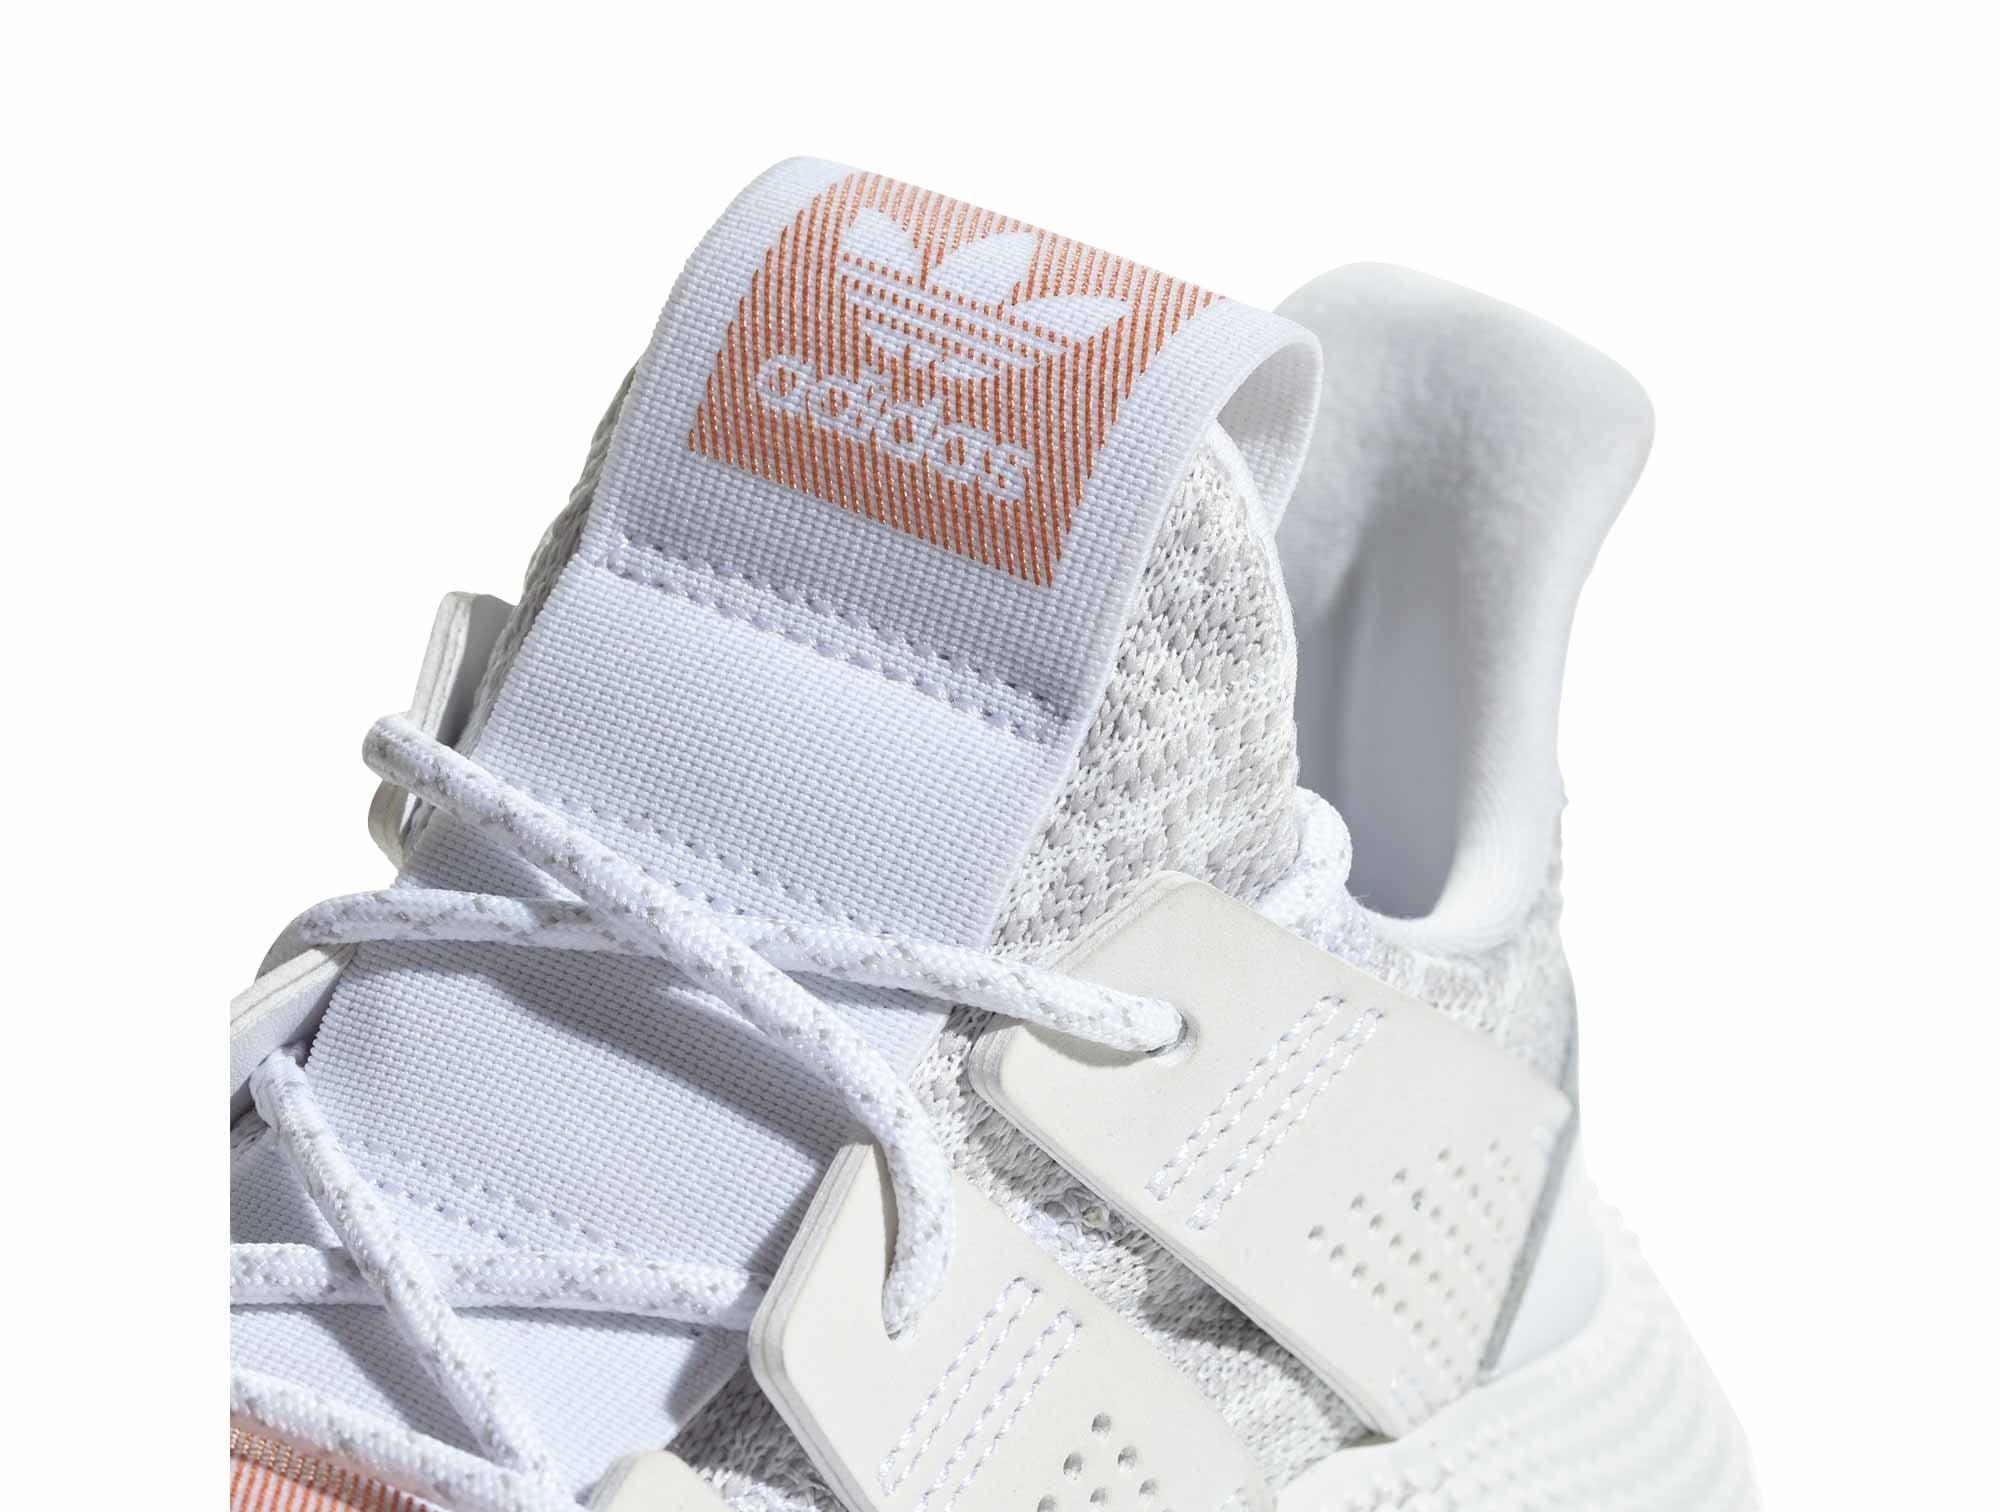 adidas prophere mujer